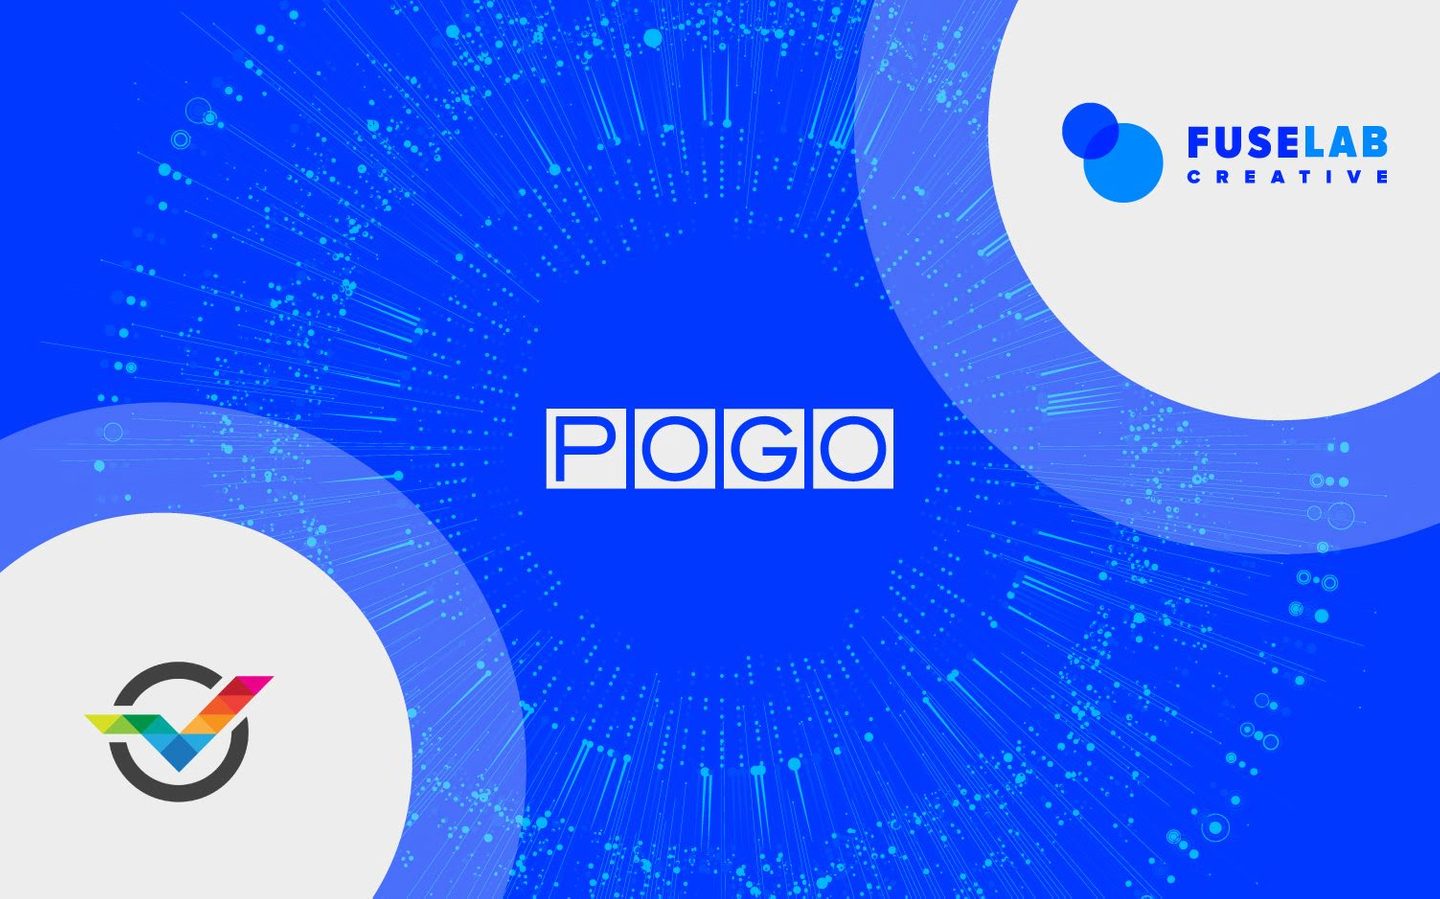 RS21 and FuseLab Creative Join POGO Team to Launch COVID-19 Relief Spending Tracker